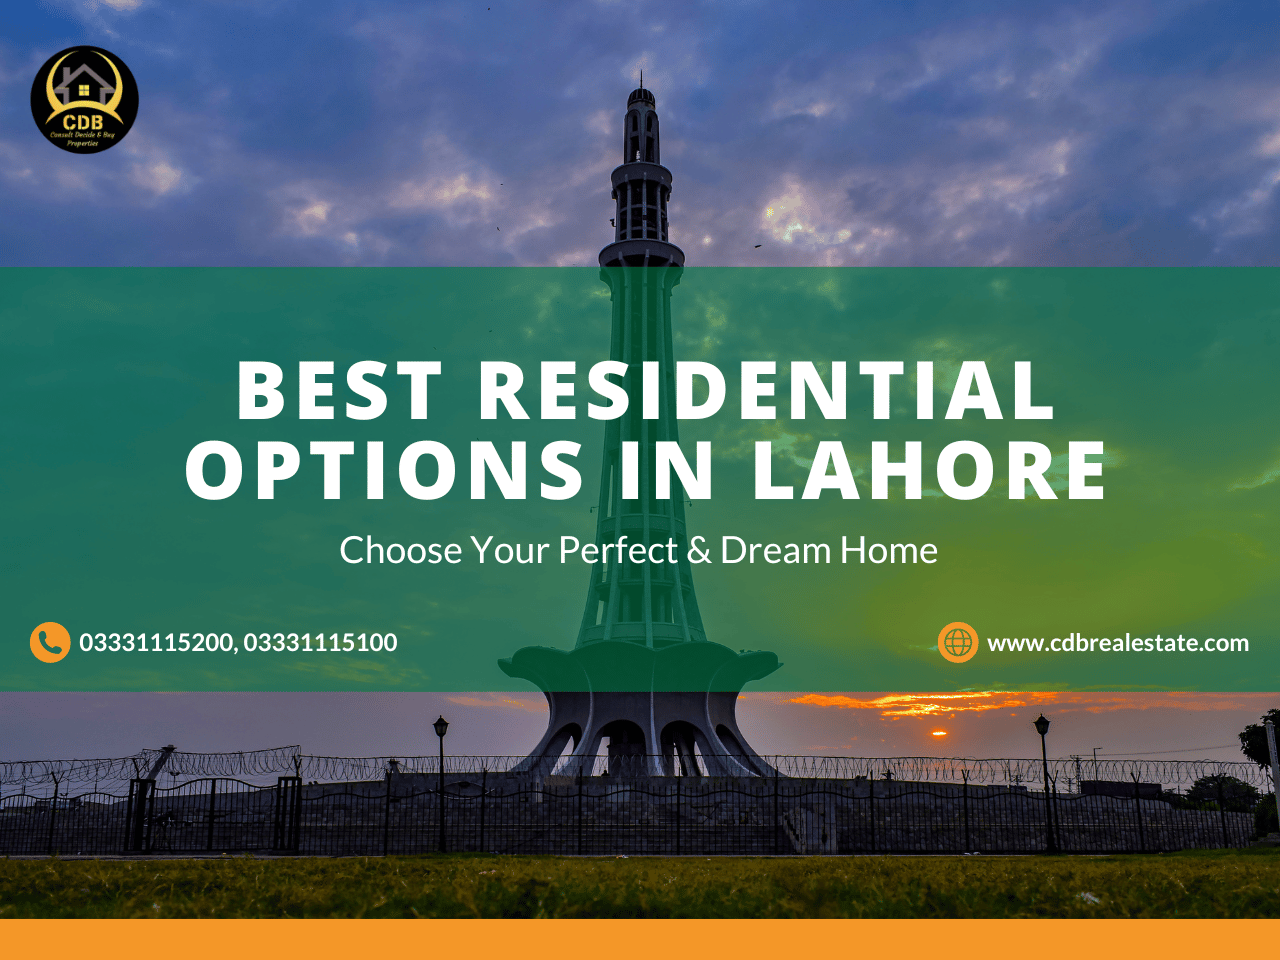 Best Residential Options in Lahore